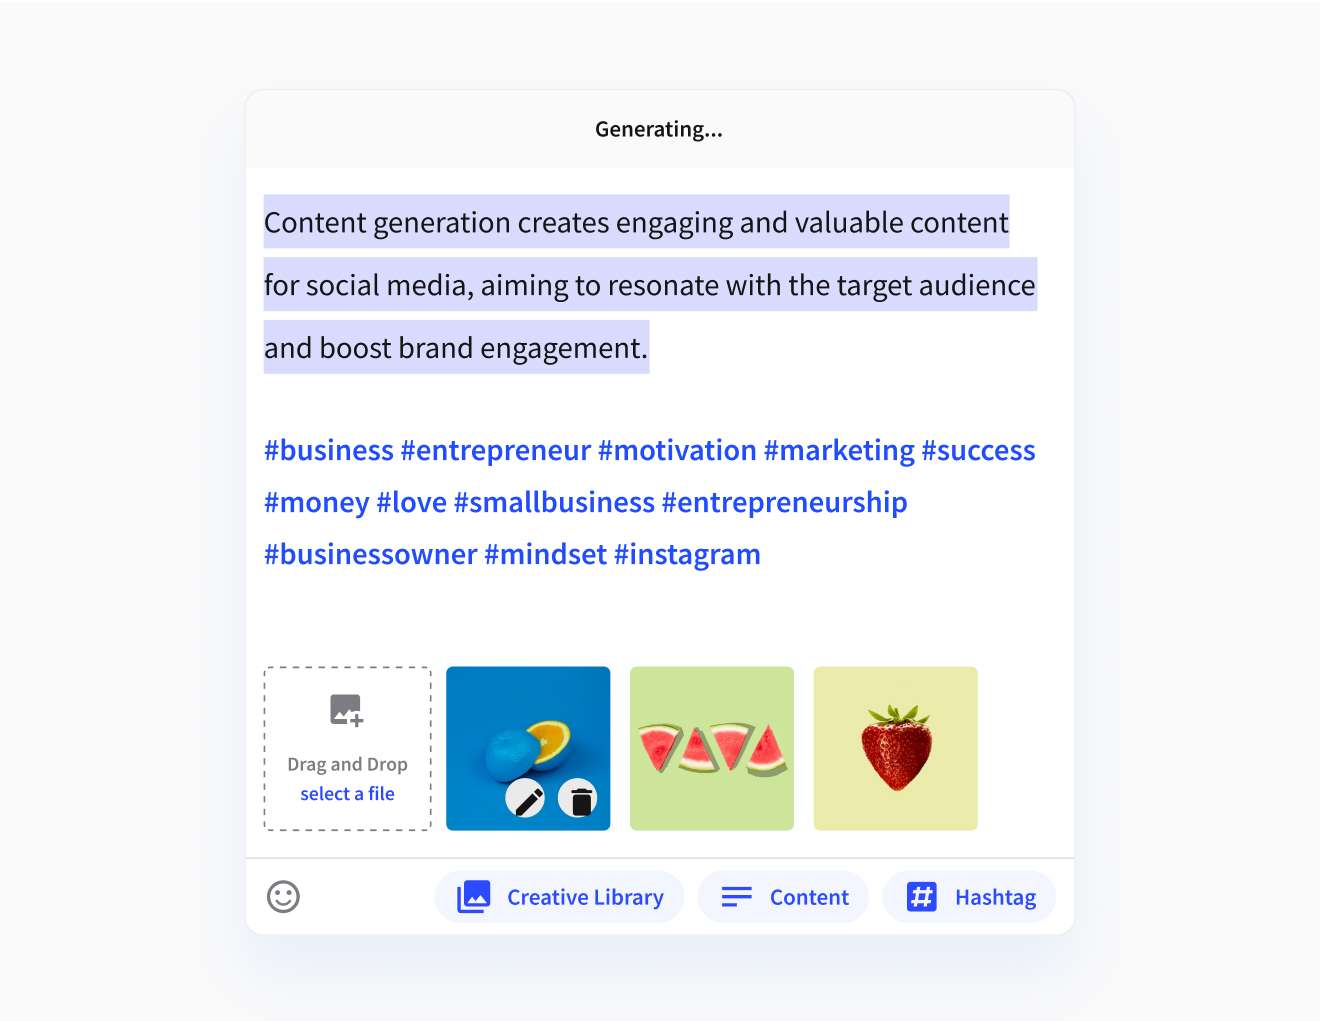 Content creation tool interface with a focus on generating engaging social media content, including a selection of popular business and motivational hashtags, and a creative library for media assets.